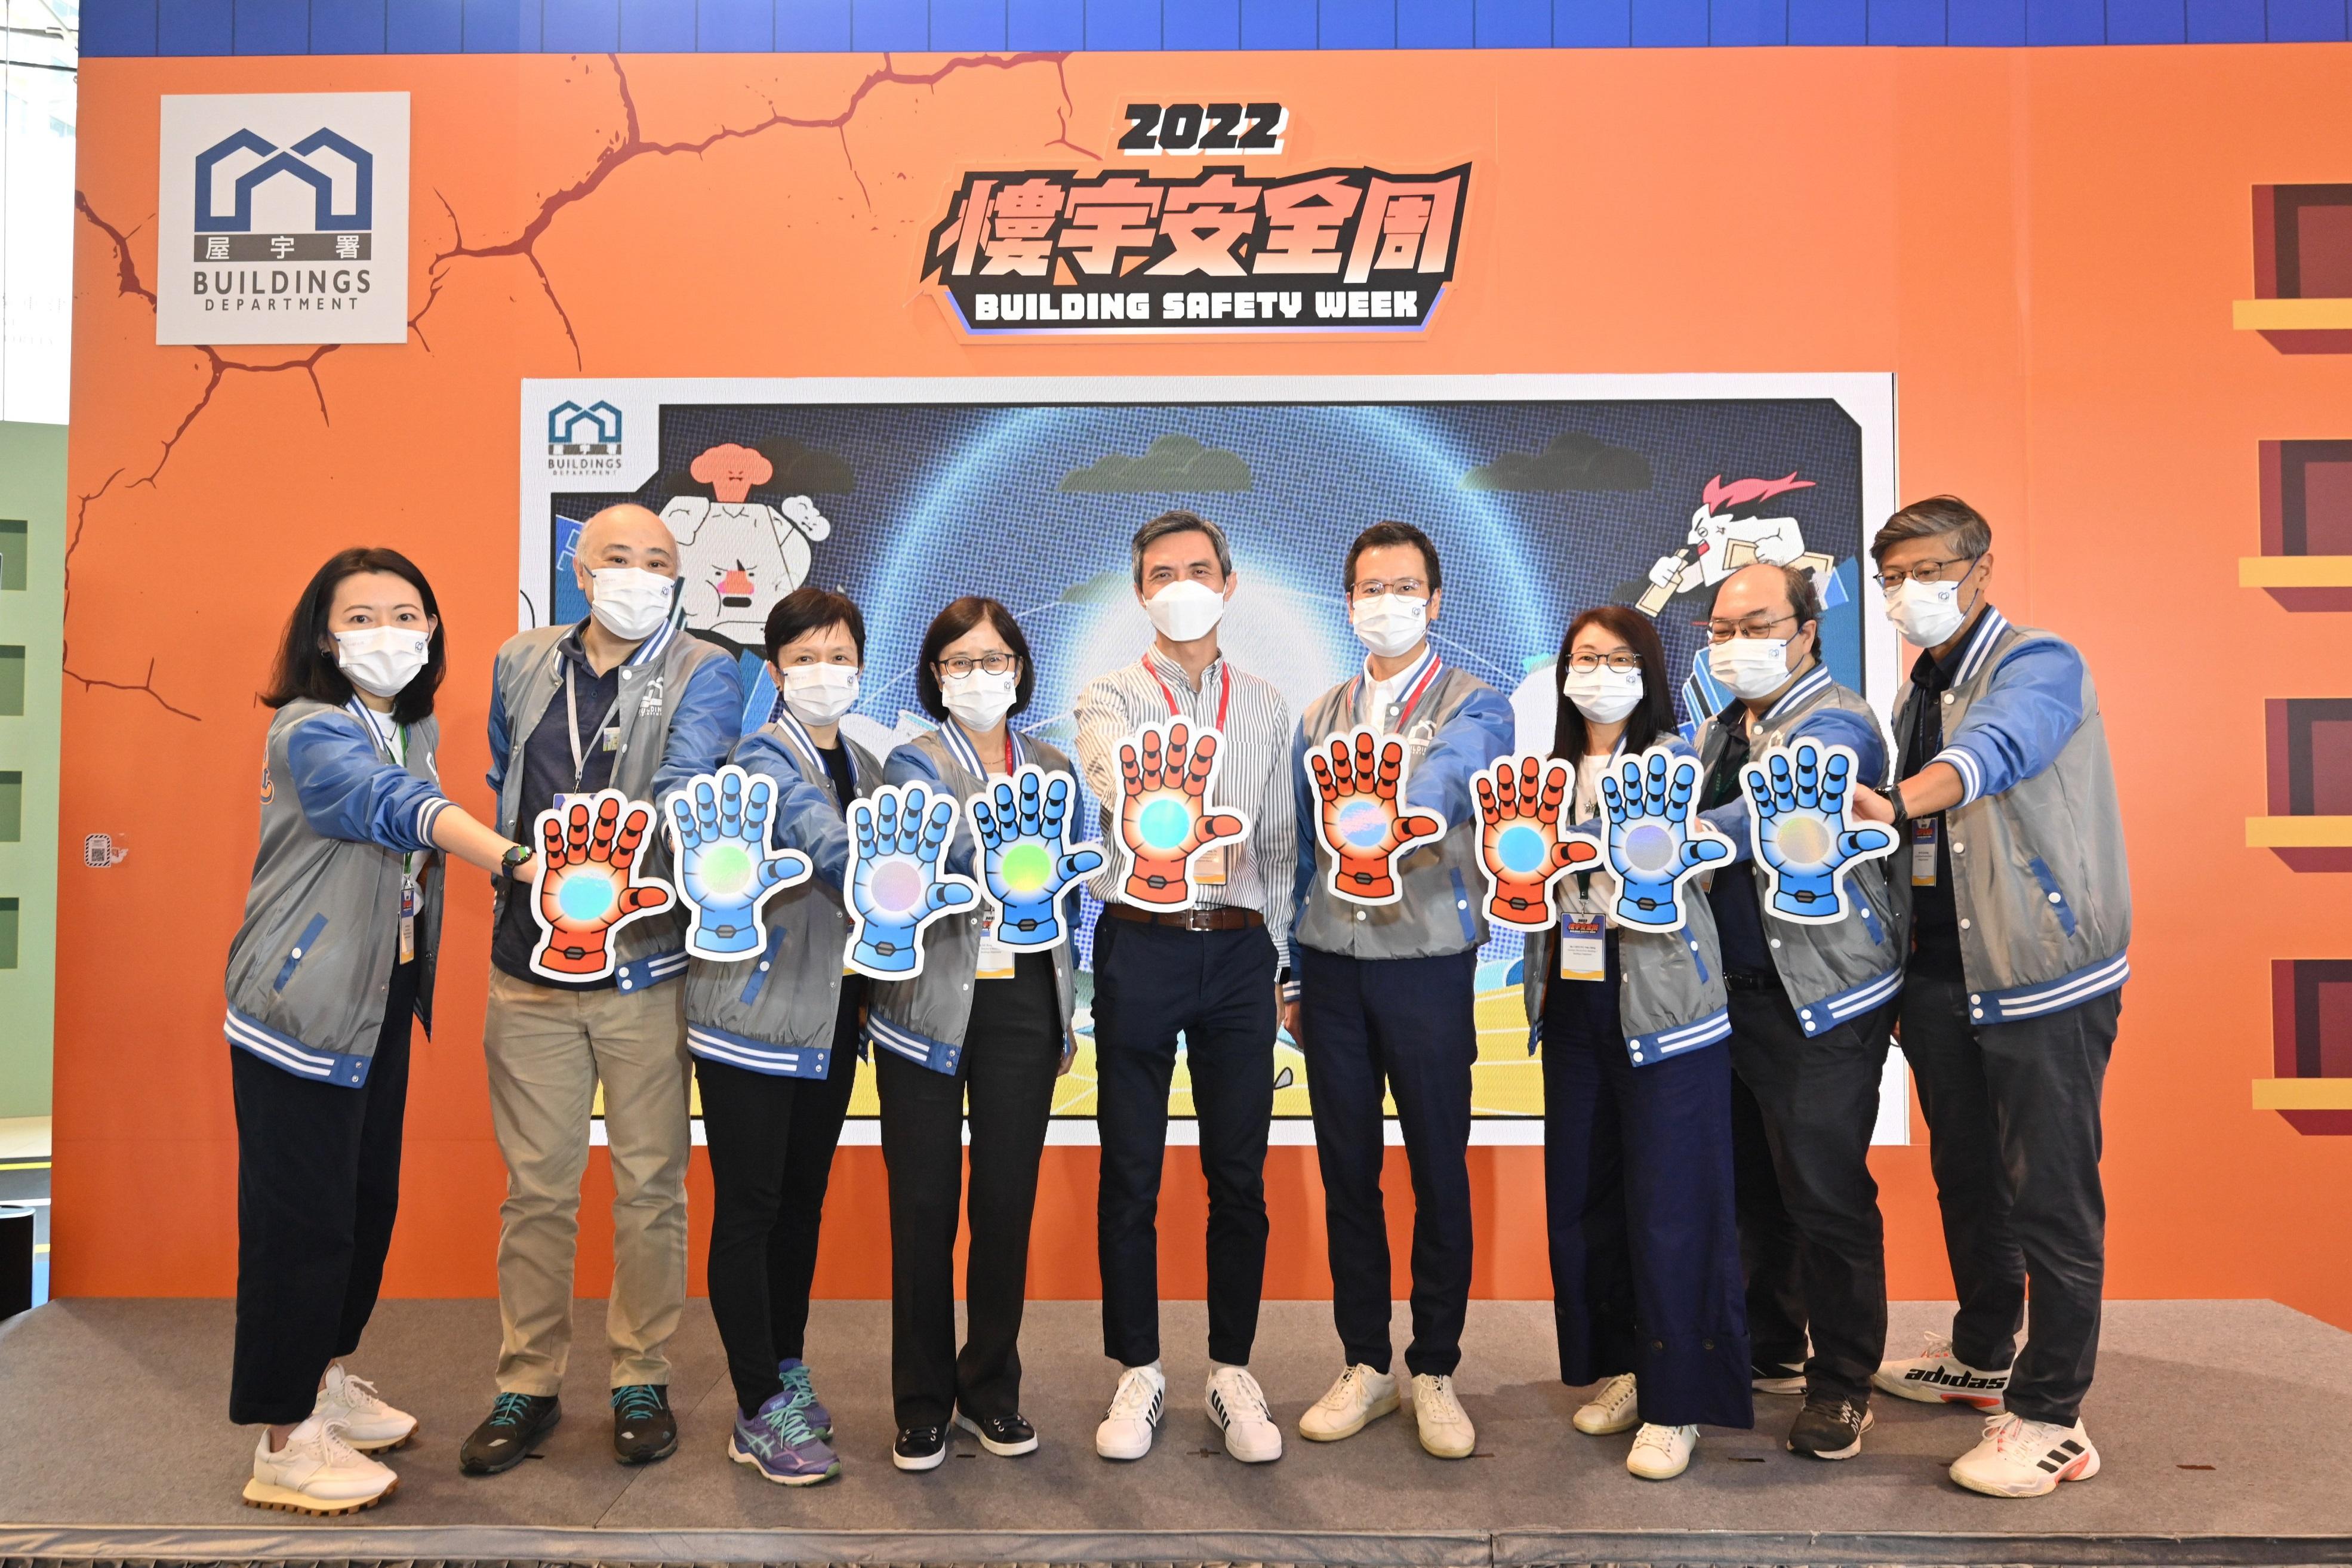 The Acting Permanent Secretary for Development (Planning and Lands), Mr Vic Yau (centre), and the Director of Buildings, Ms Clarice Yu (fourth left), accompanied by senior directorate officers of the Buildings Department kicked off the Building Safety Week 2022 in Tsuen Wan today (October 22).